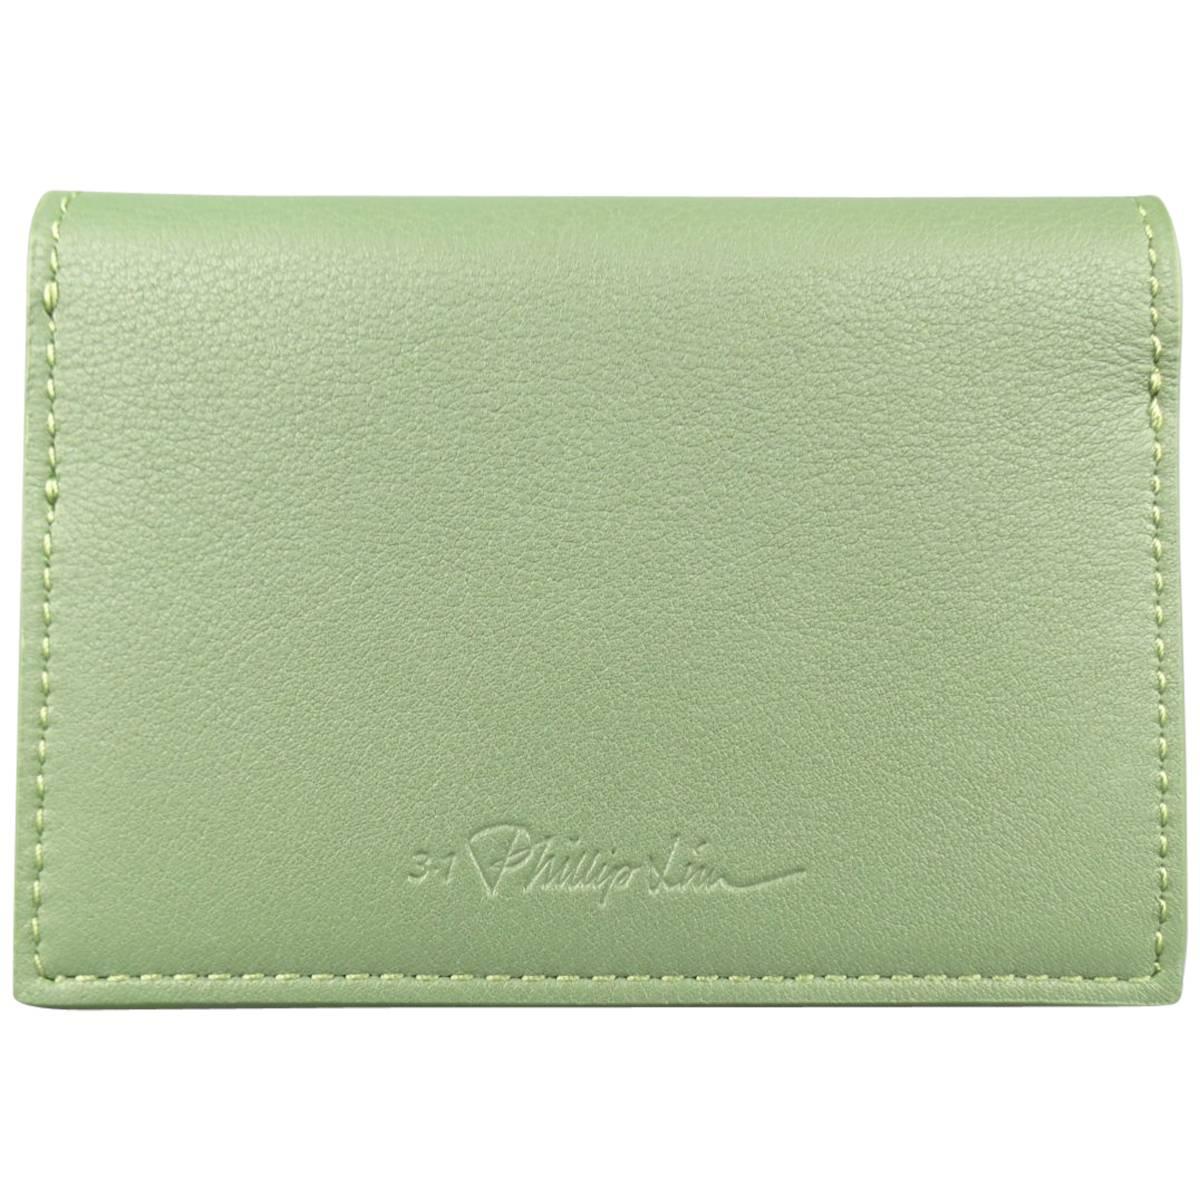 3.1 PHILLIP LIM Green Leather Card Case Wallet